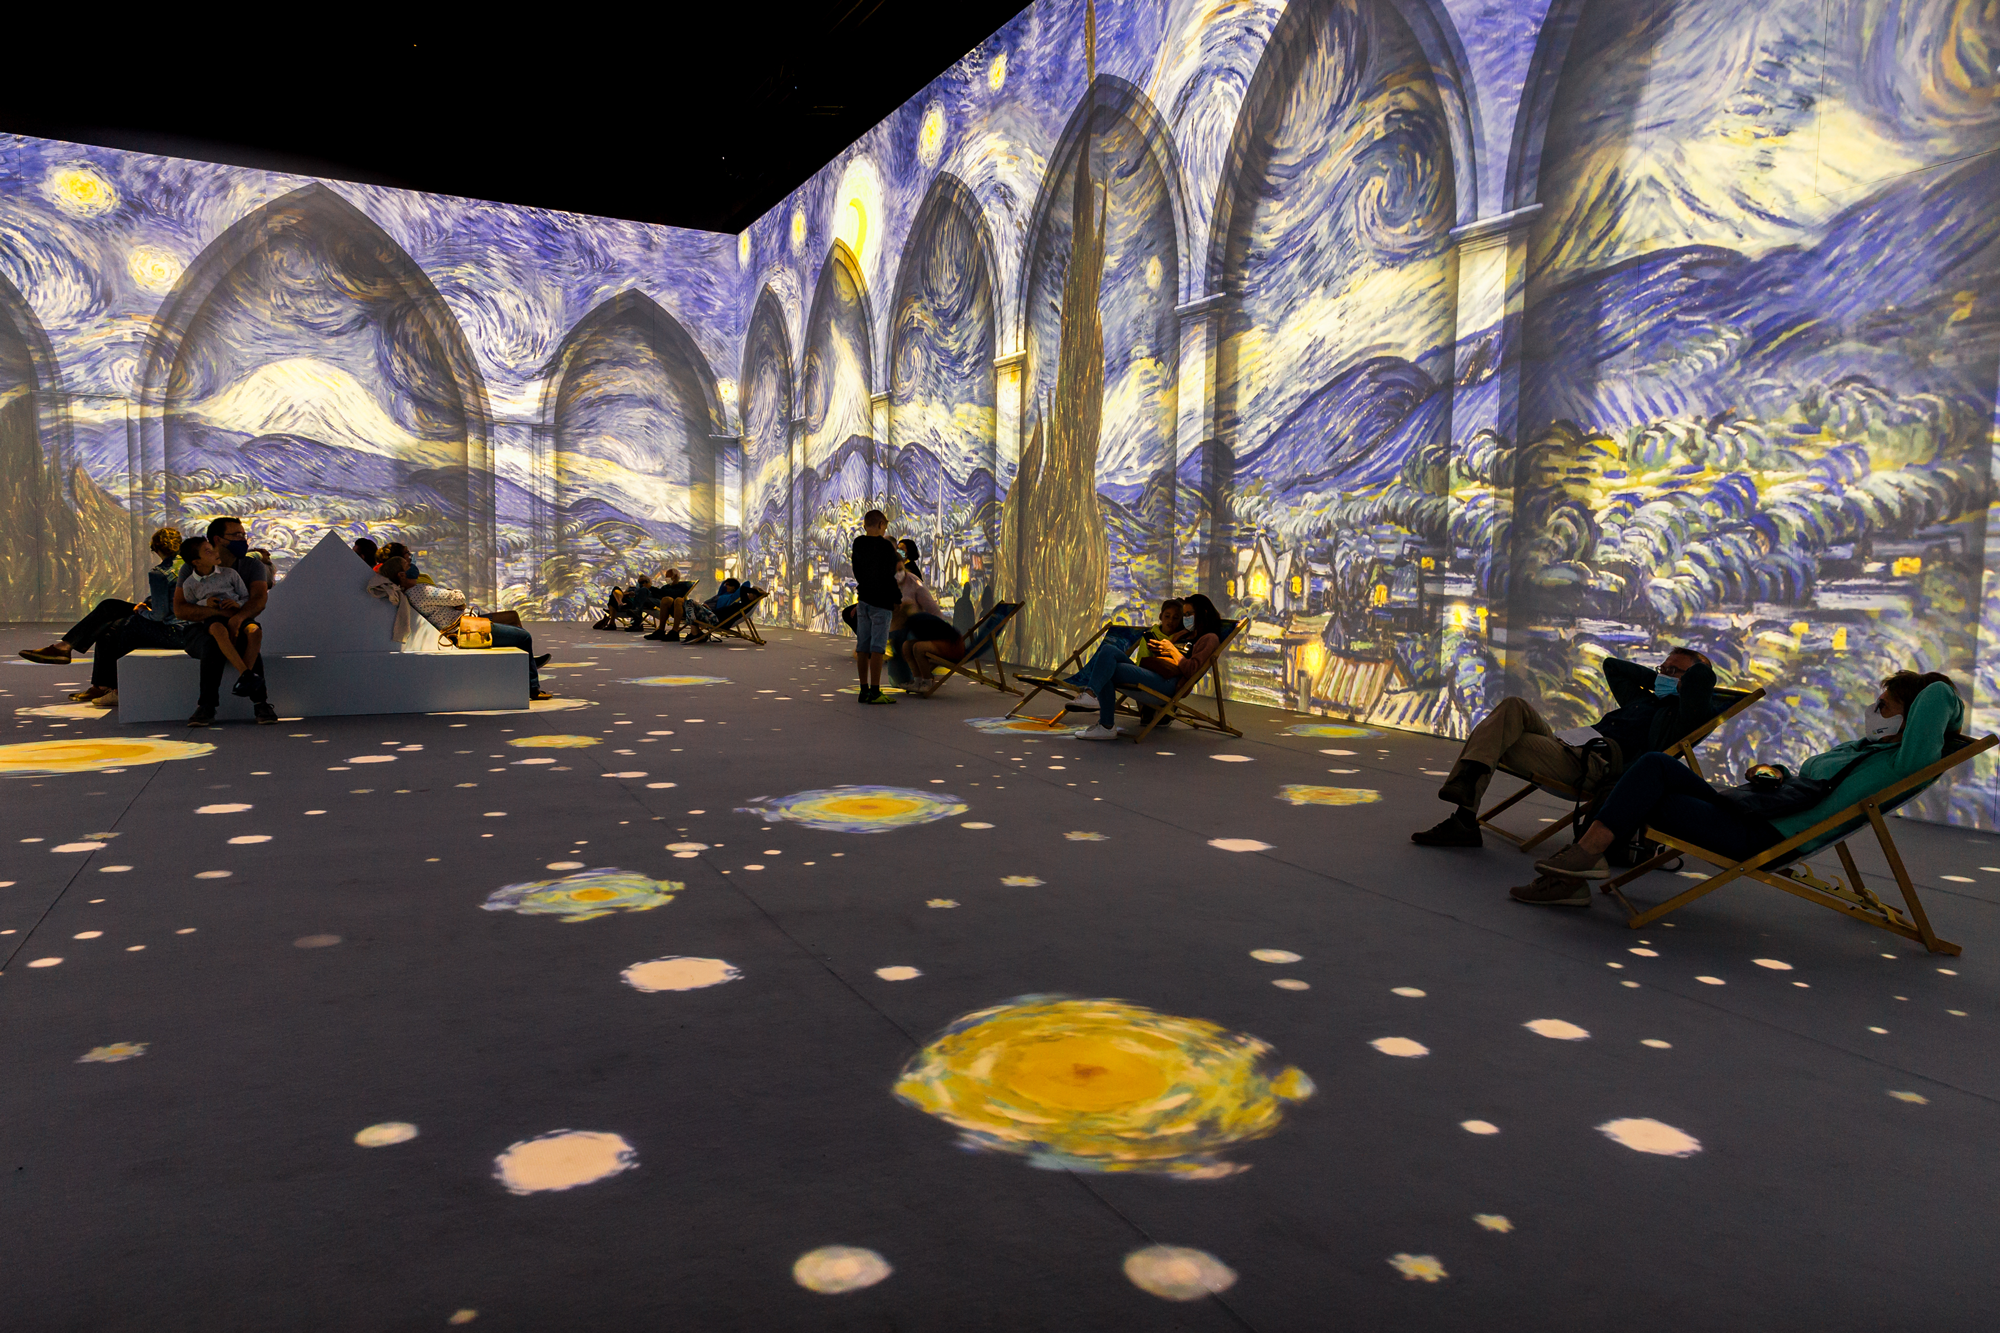 Popular immersive Van Gogh coming to New Orleans in 2022